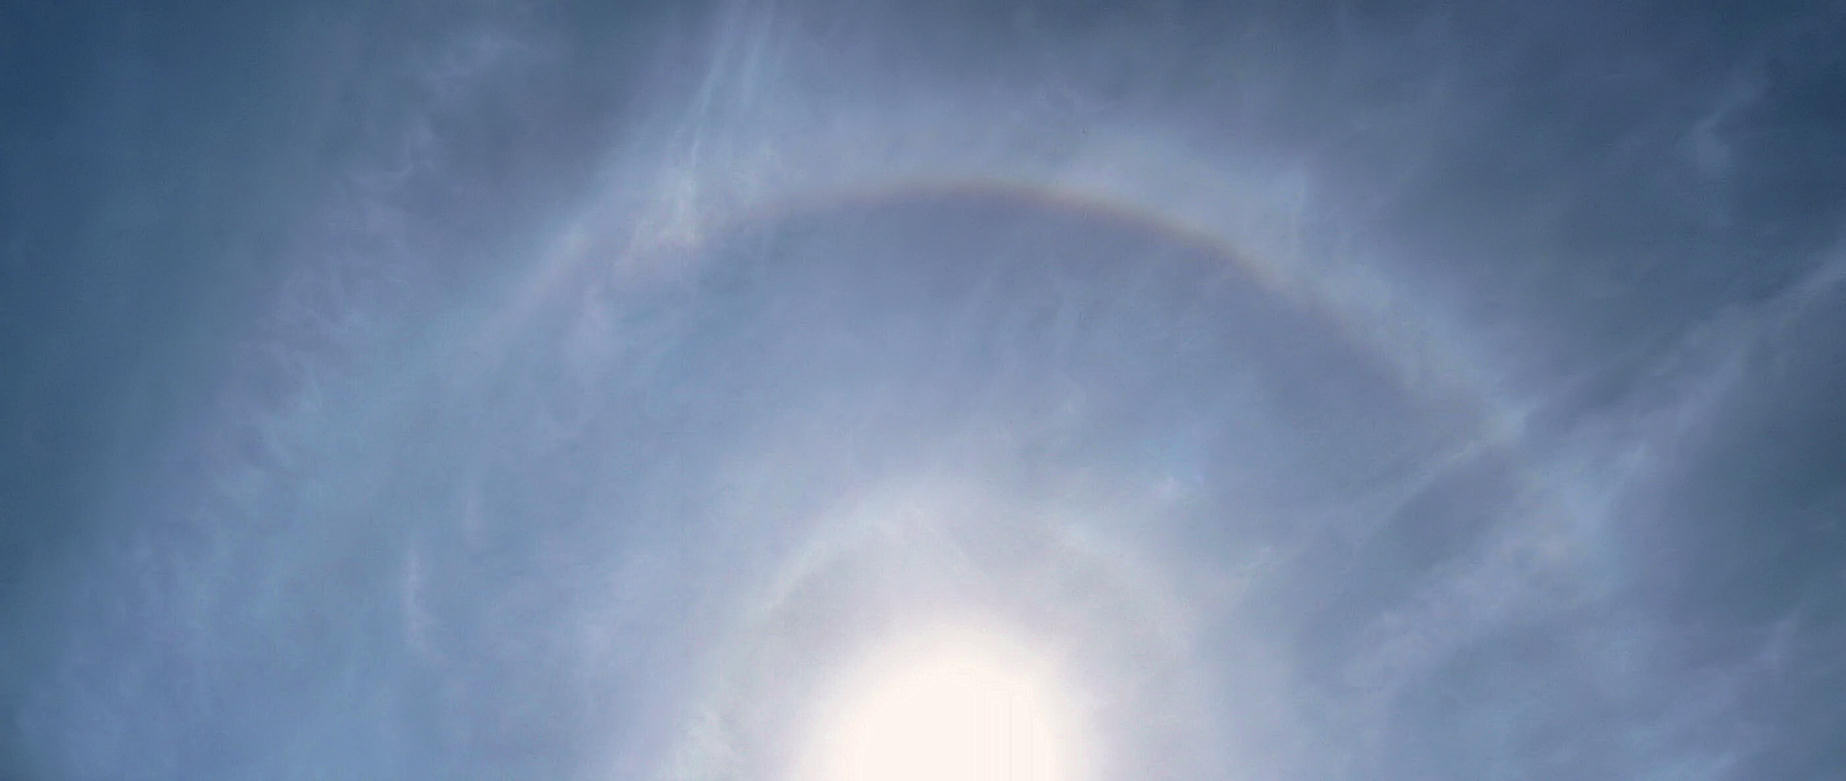 Particular of solar Halos: 82 KB; click on the image to enlarge at 1846x781 pixels